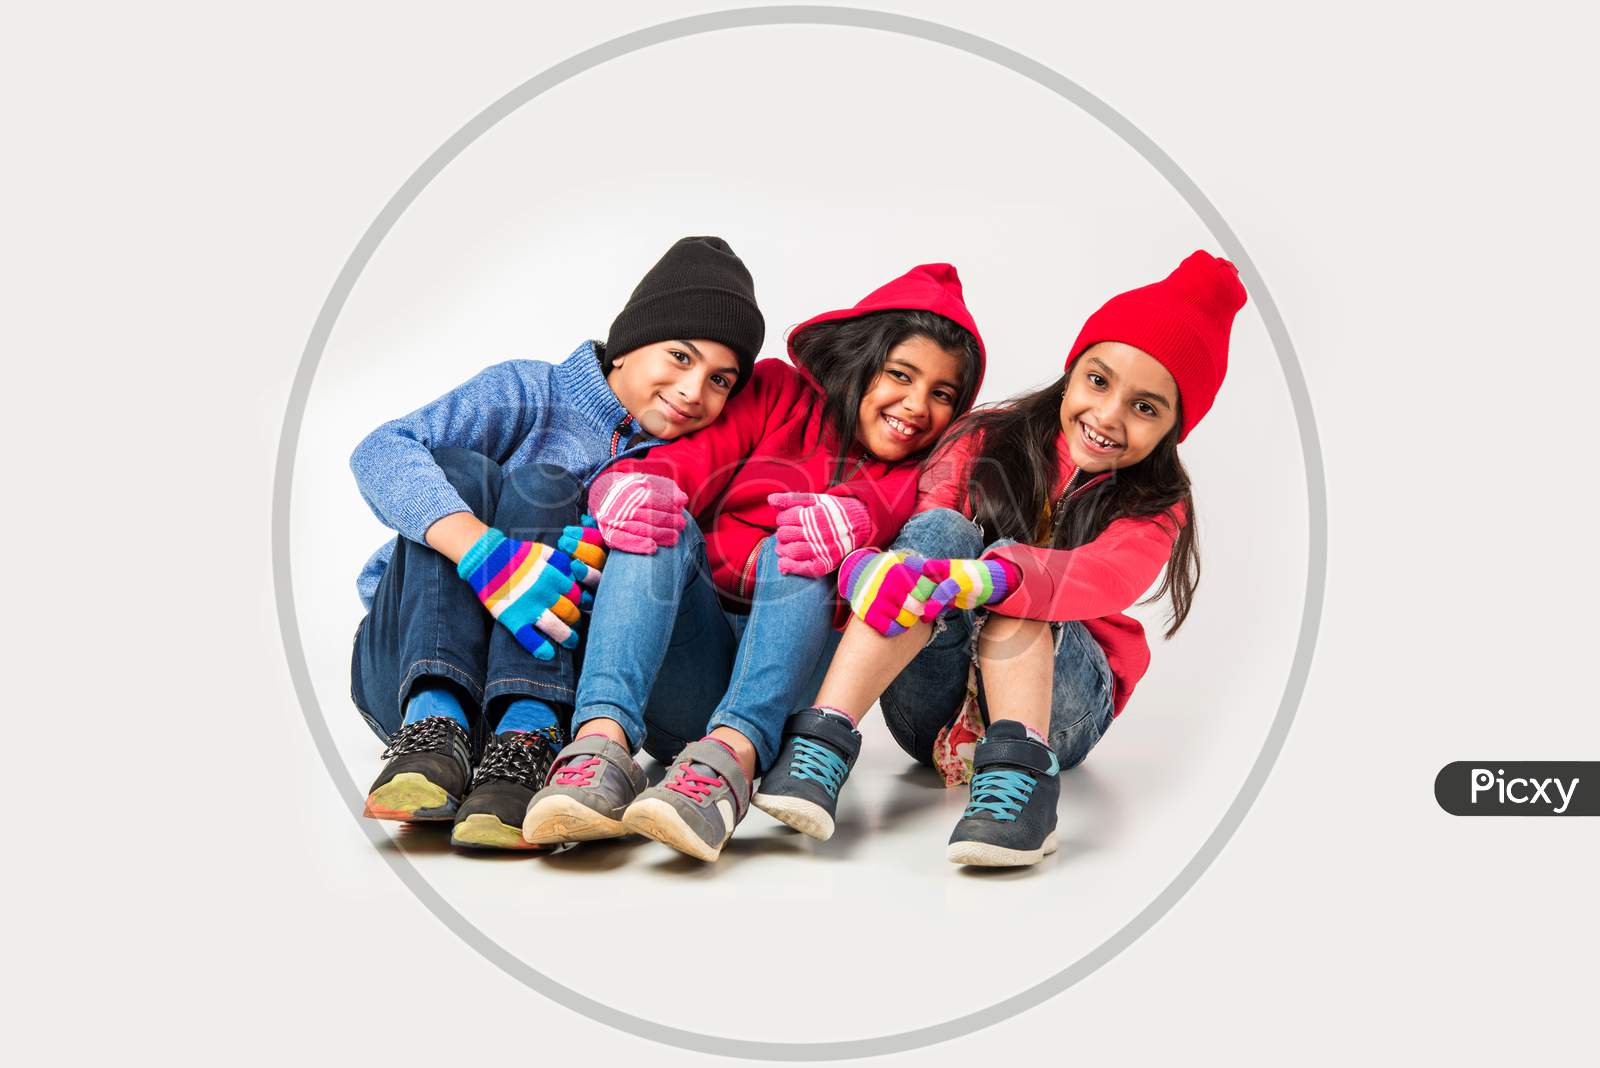 Three Indian /asian kids in winter wear sitting against white background and having fun